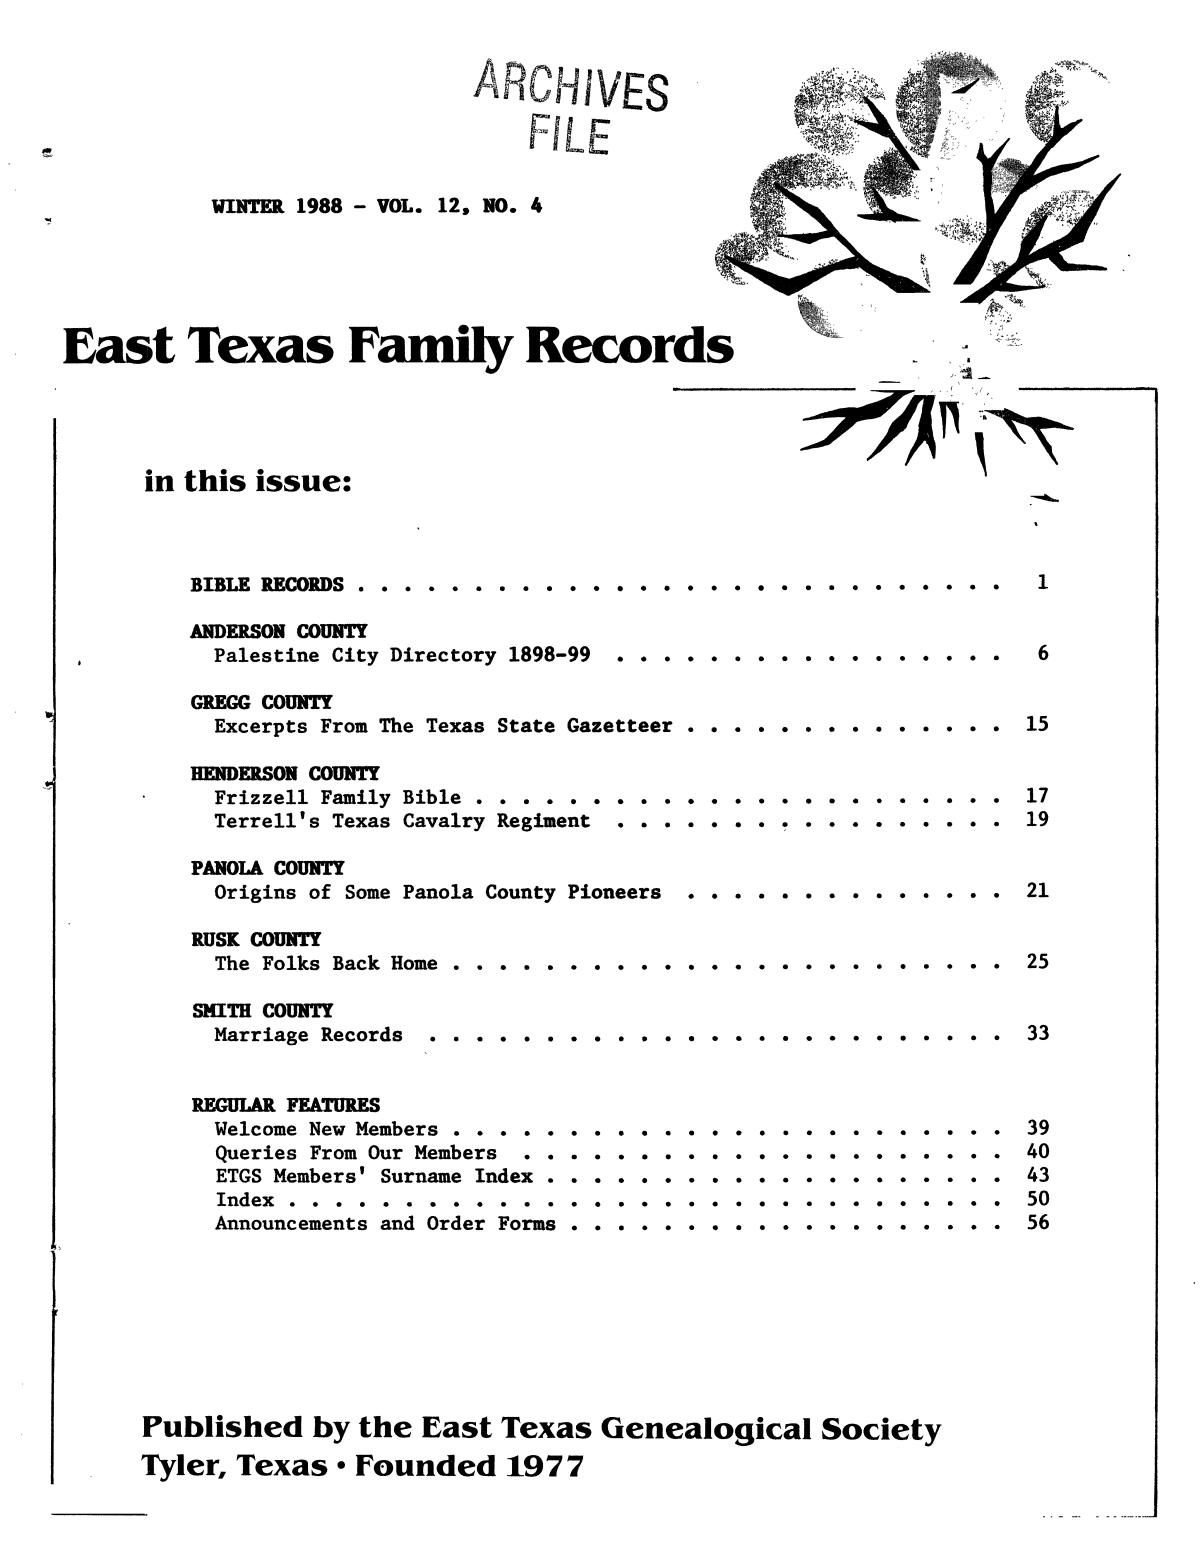 East Texas Family Records, Volume 12, Number 4, Winter 1988
                                                
                                                    Front Cover
                                                